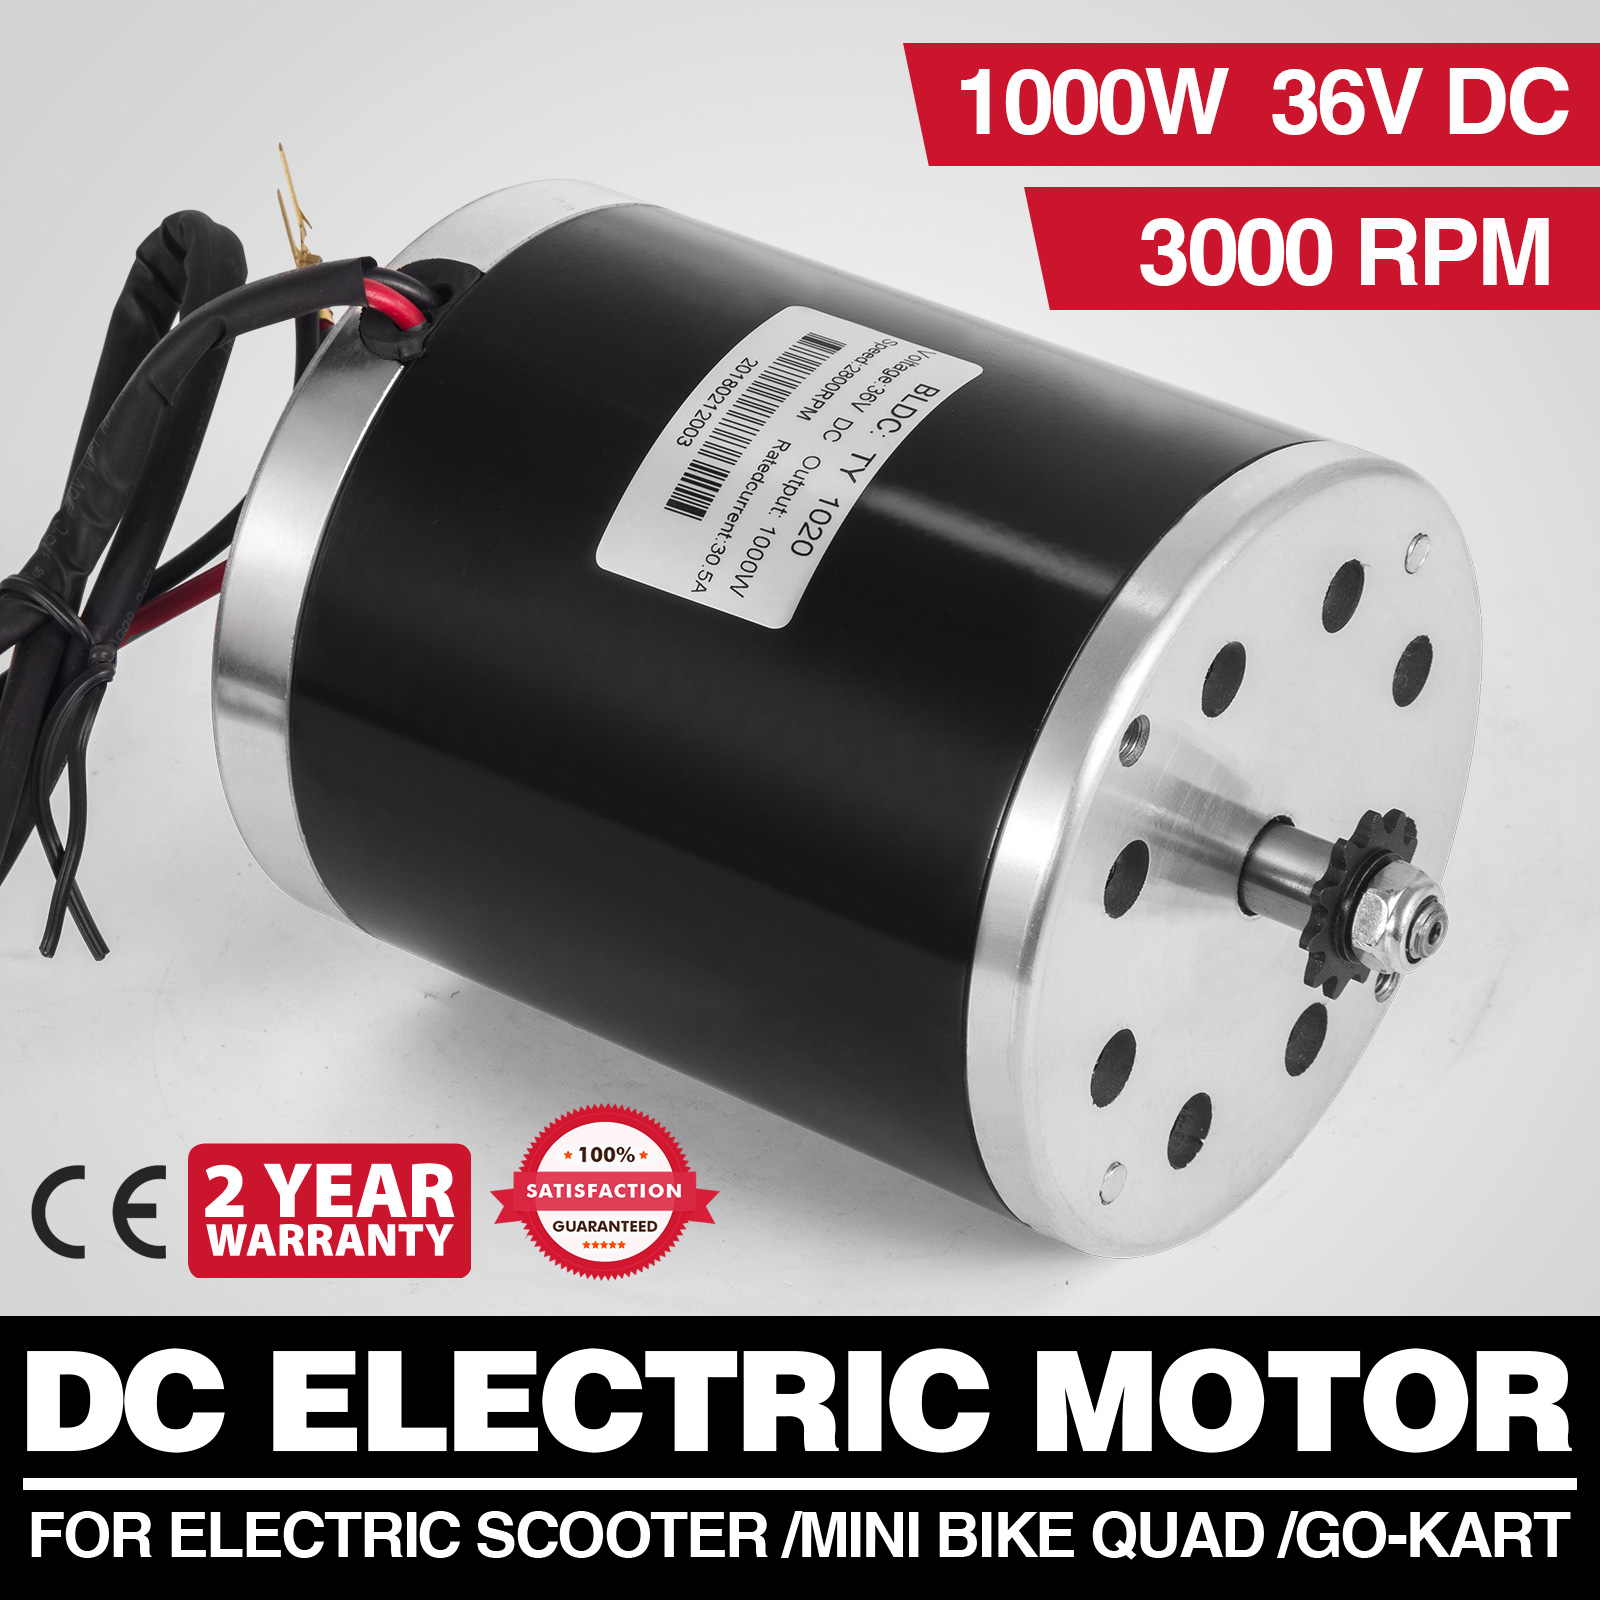 MOT4265 NEW Reliance 1/2 HP T56S1005A ME56C Frame Power Matched DC Motor 